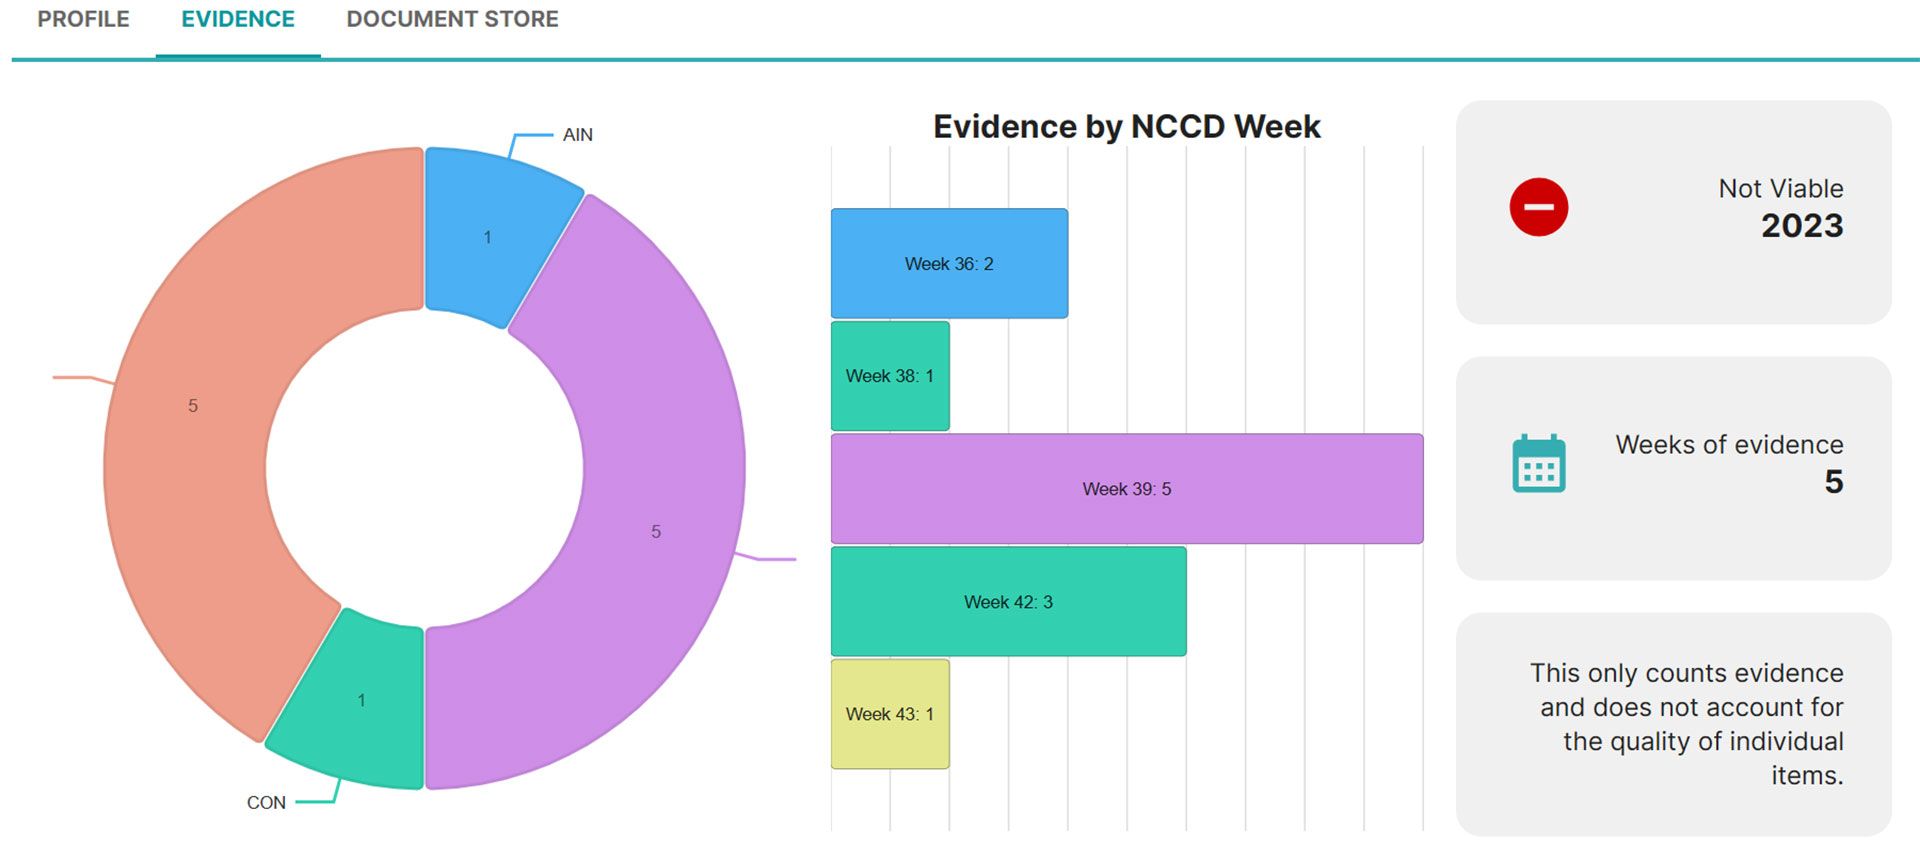 a pie chart within the NCAPP software evidence tab